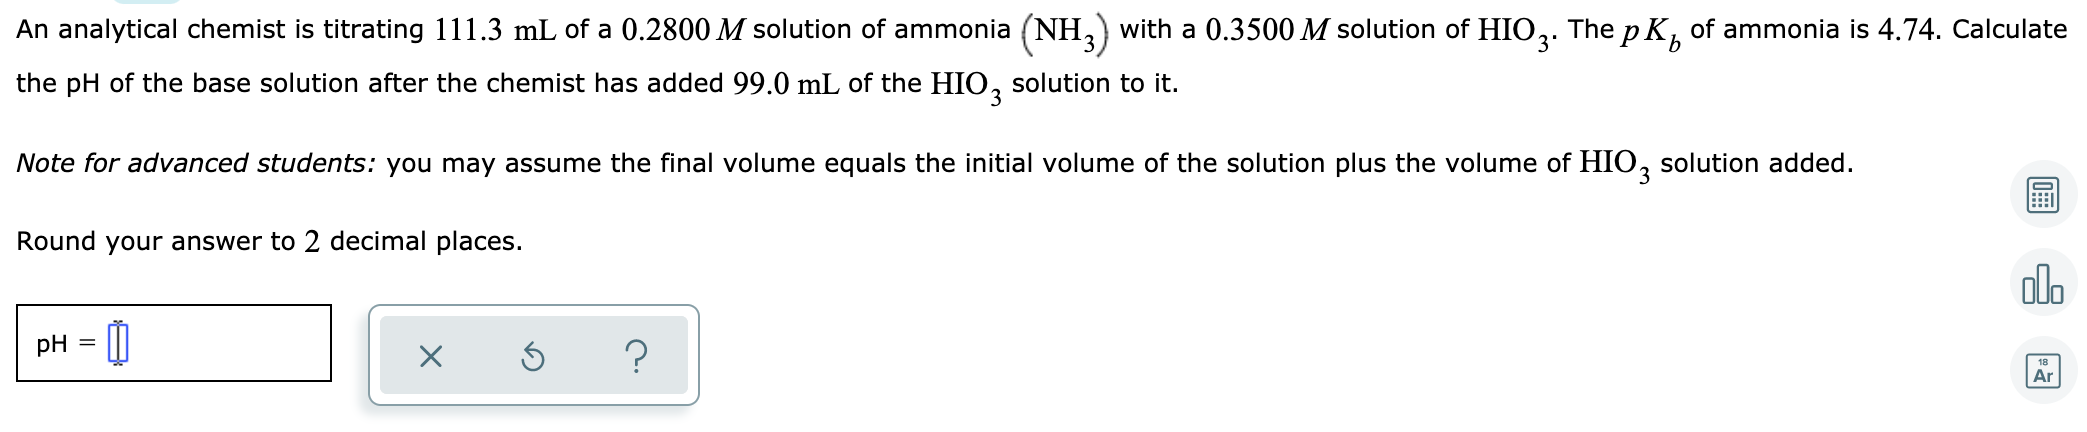 An analytical chemist is titrating 111.3 mL of a 0.2800 M solution of ammonia (NH, with a 0.3500 M solution of HIO,. The p K, of ammonia is 4.74. Calculate
3'
the pH of the base solution after the chemist has added 99.0 mL of the HIO, solution to it.
Note for advanced students: you may assume the final volume equals the initial volume of the solution plus the volume of HIO, solution added.
Round your answer to 2 decimal places.
